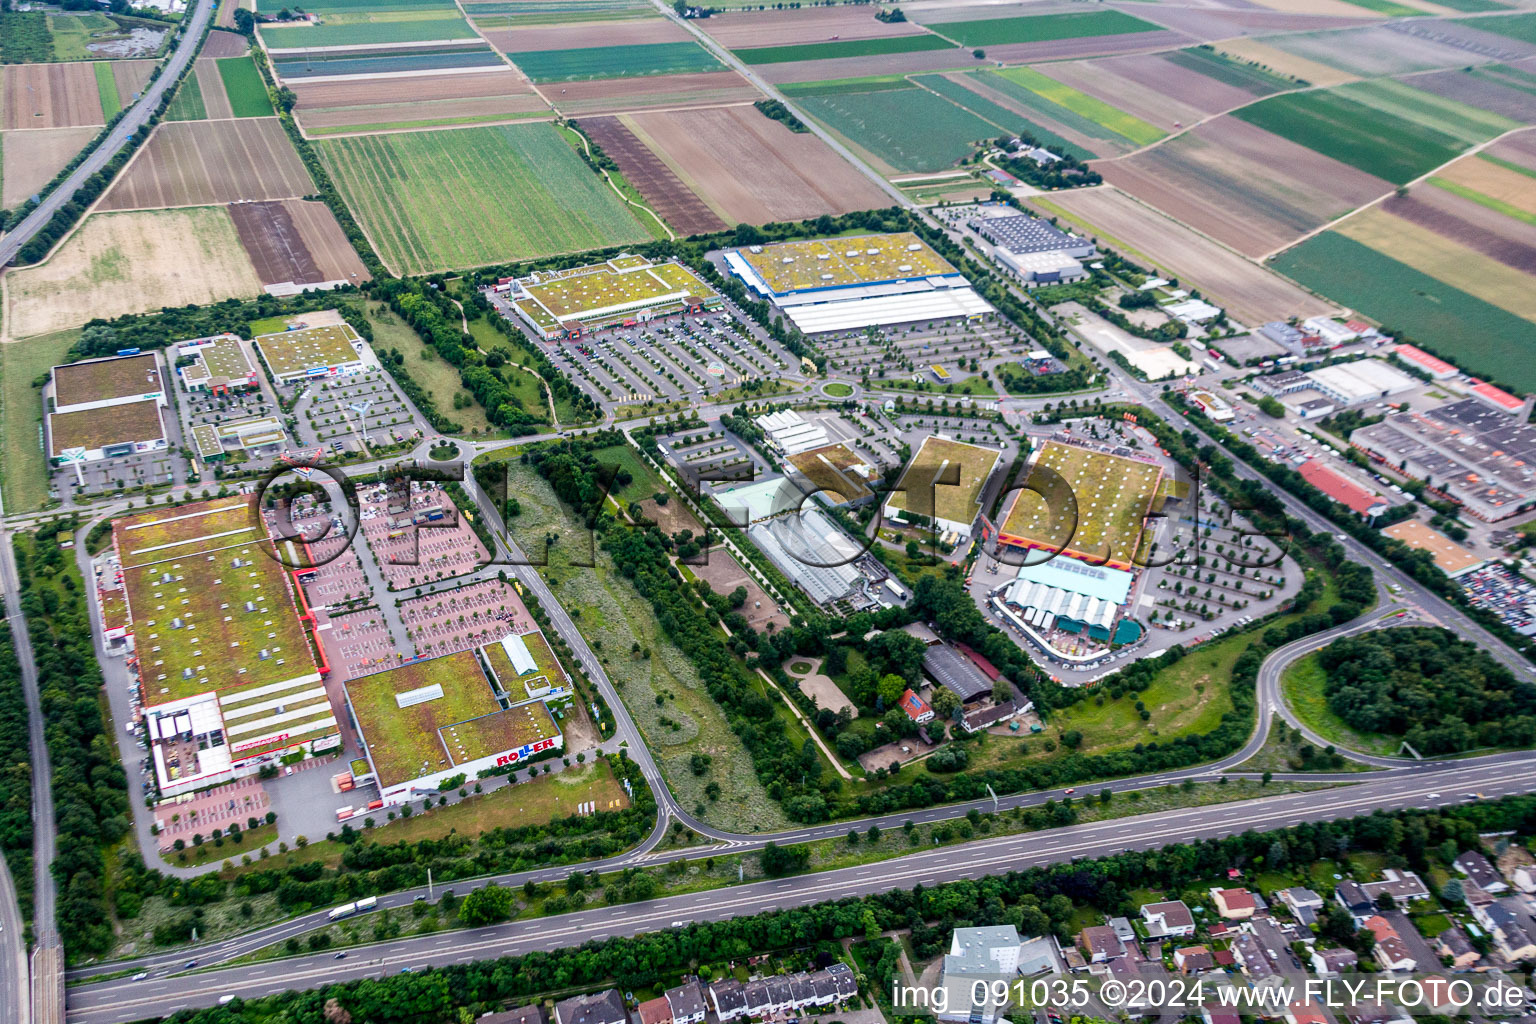 Aerial view of Building of the construction market BAUHAUS and Roller Furniture in the district Oggersheim in Ludwigshafen am Rhein in the state Rhineland-Palatinate, Germany